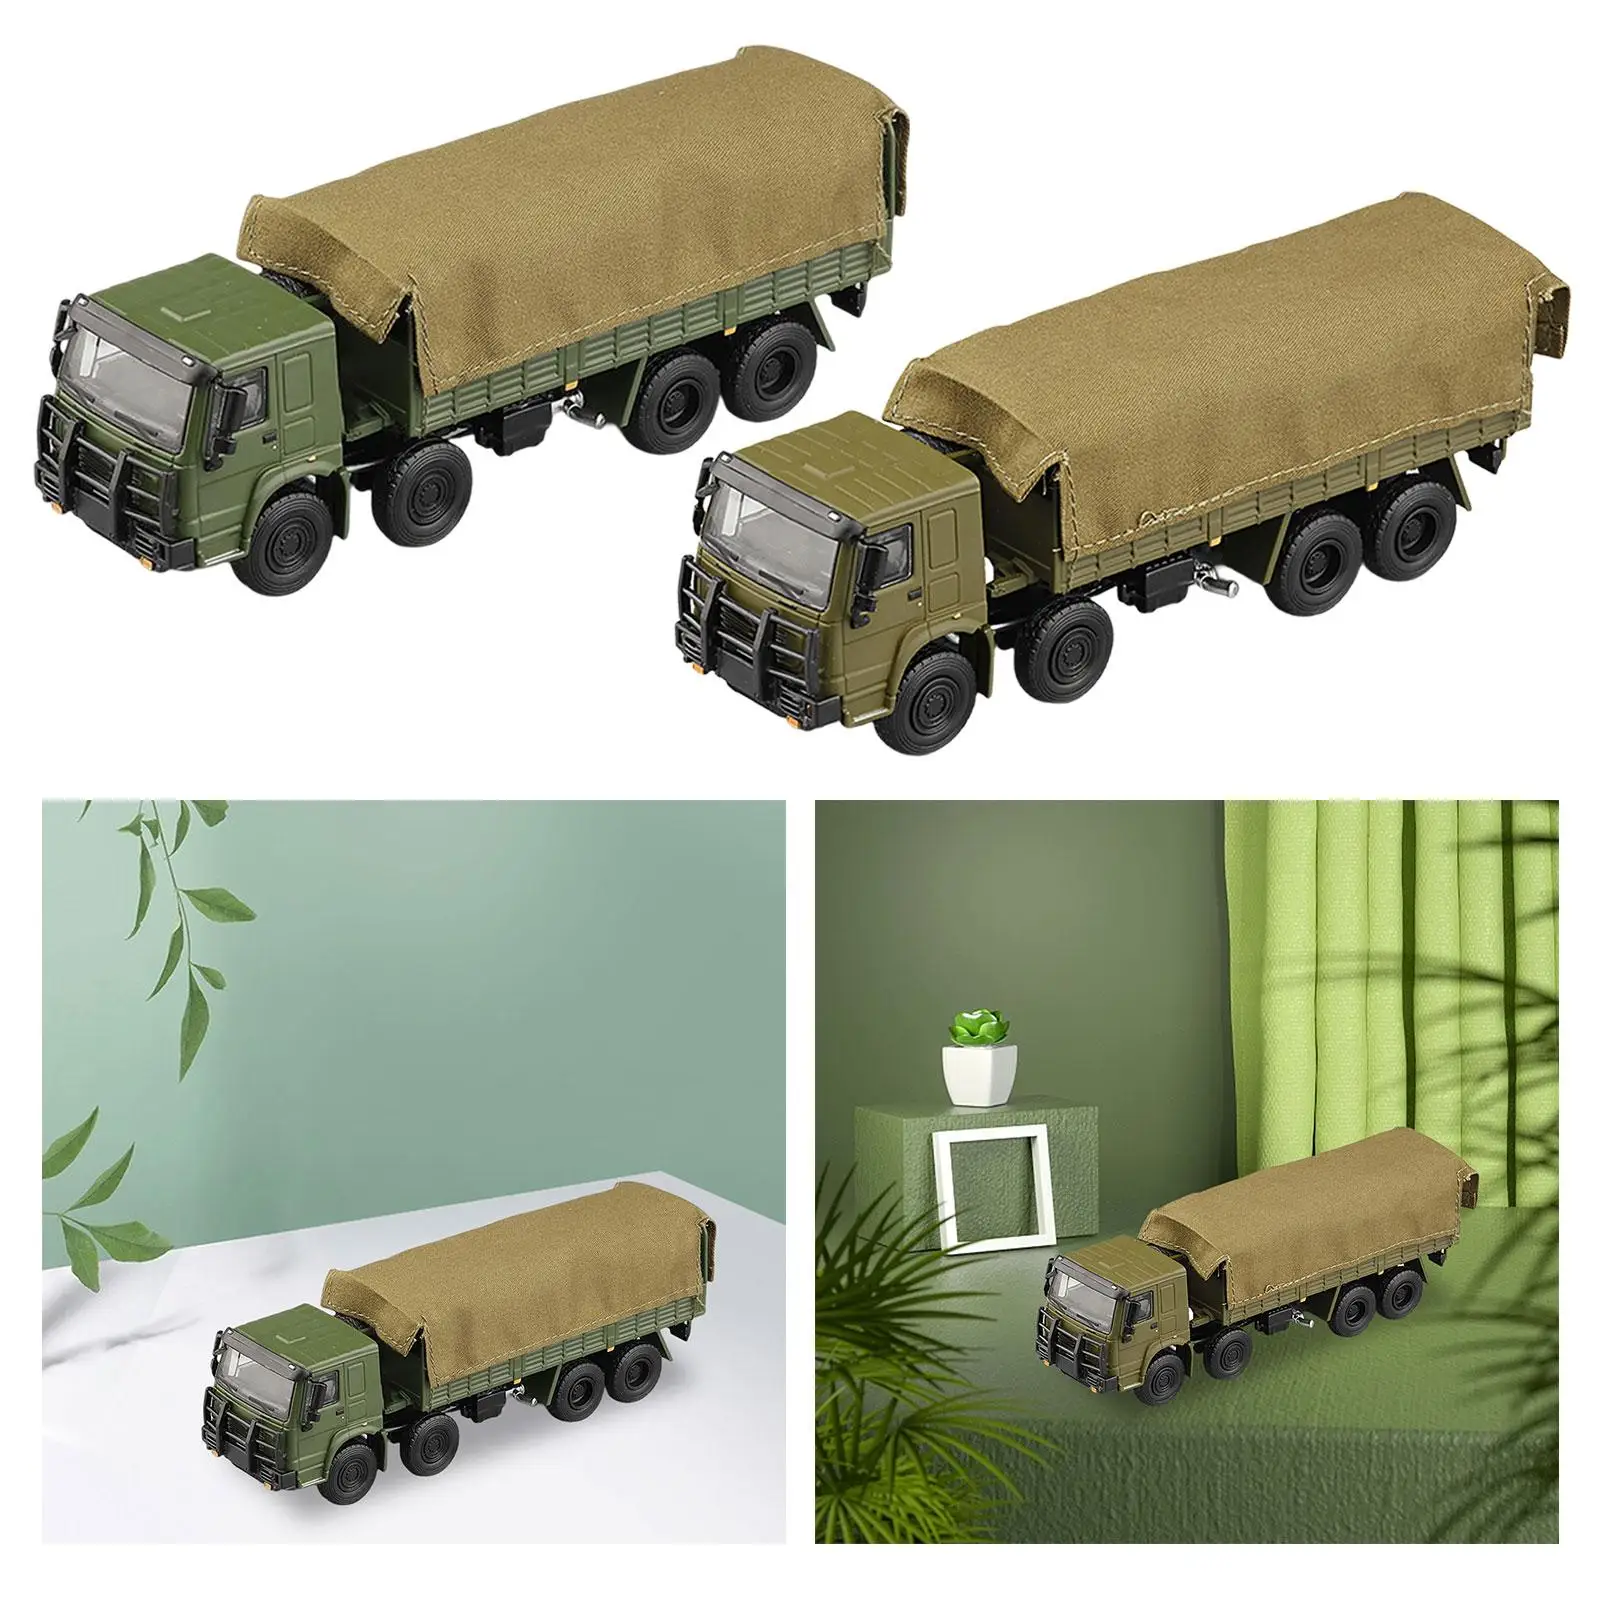 1:64 Diorama Street Car Model Mini Vehicles Toys Alloy Car Model Collection for Diorama Micro Landscapes Photography Props Decor